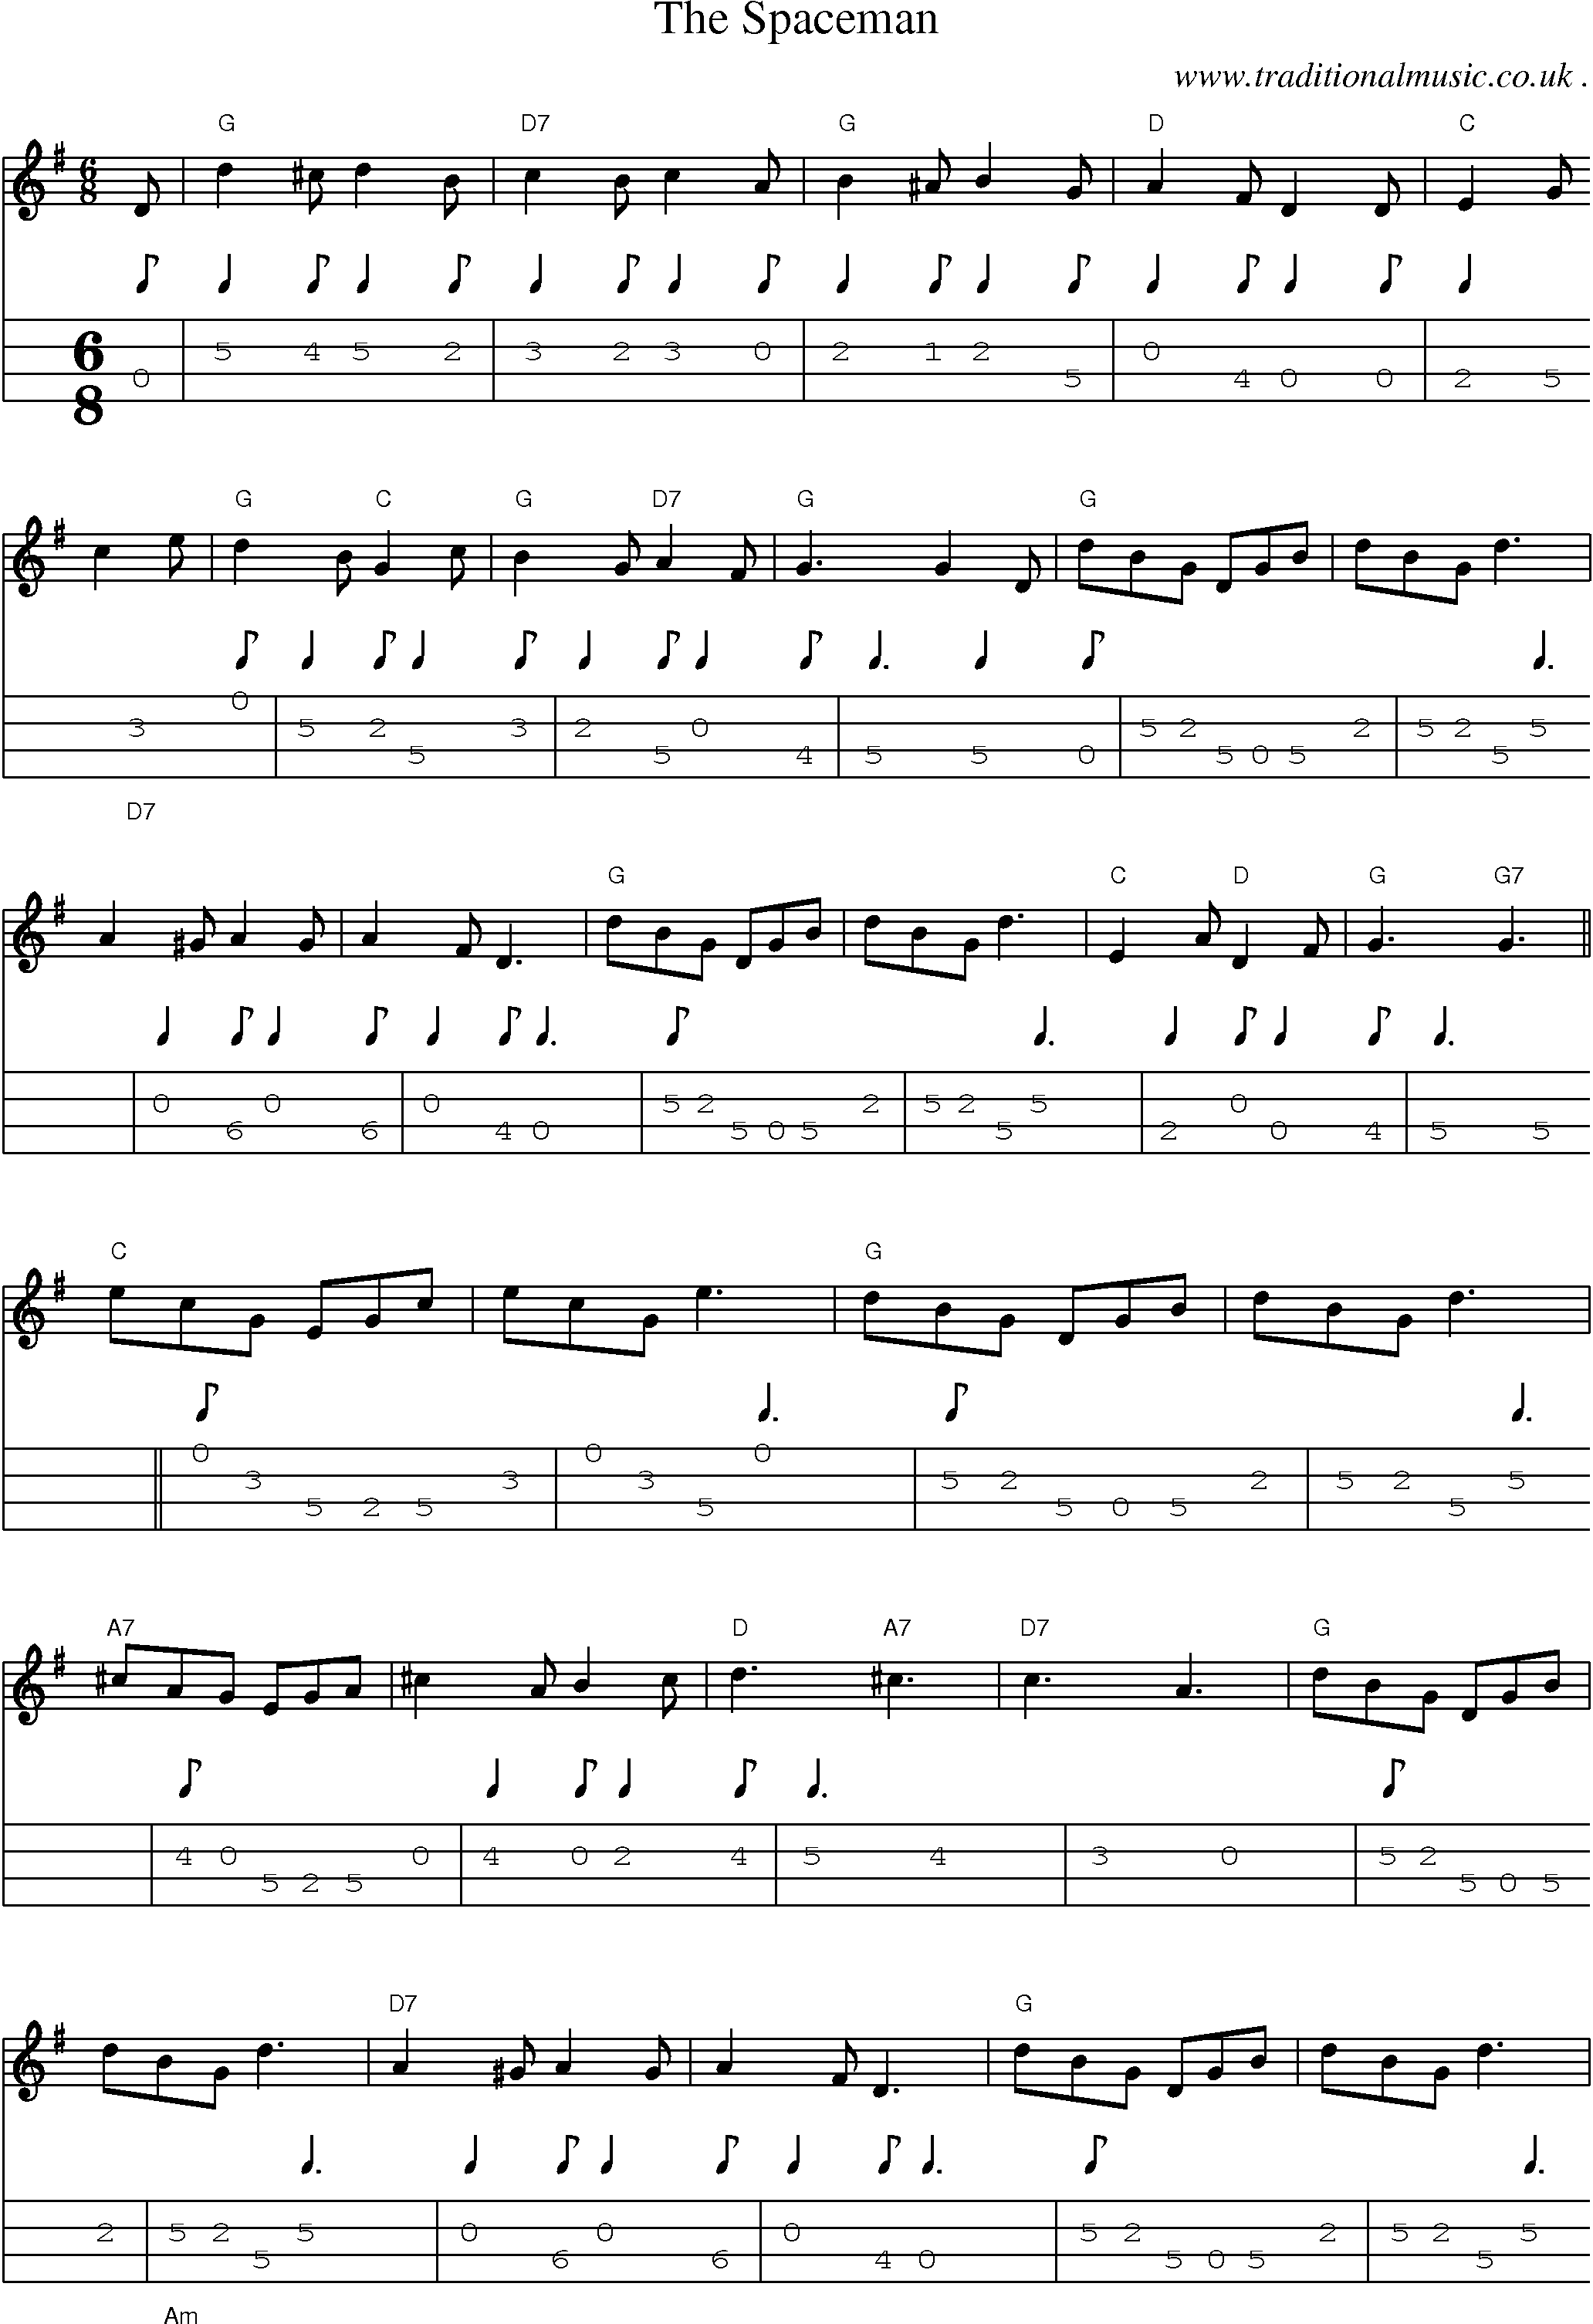 Sheet-Music and Mandolin Tabs for The Spaceman